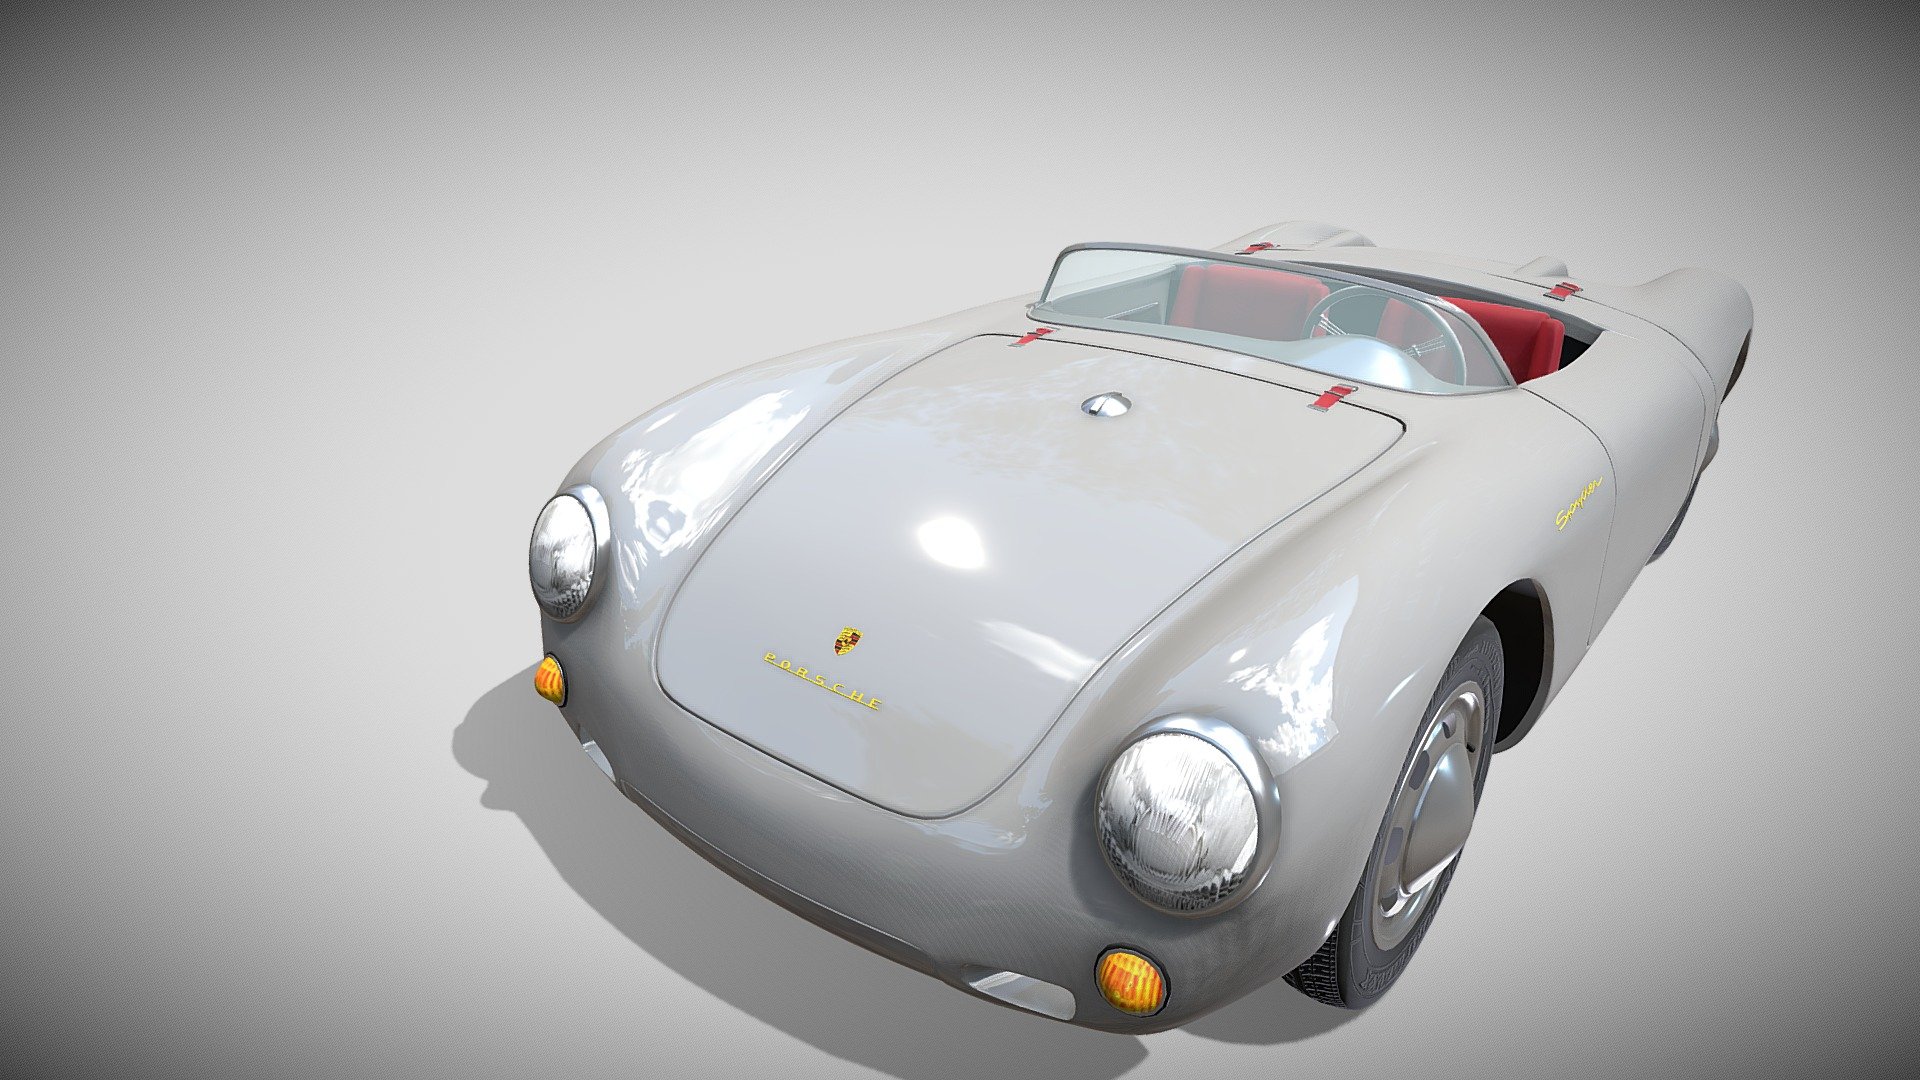 A very accurate model of a Porsche 550 Spyder with a HIGHLY DETAILED INTERIOR. The model comes in four formats:
-.blend, rendered with cycles, as seen in the images;
-.obj, with materials applied and textures;
-.dae, with materials applied and textures;
-.stl, ready to print in 3D;

This 3d model was originally created in Blender 2.71 and rendered with Cycles.
The model has materials applied in all formats, and are ready to import and render.
The model is built strictly out of quads and is subdivisable:

Subdivision 0: 144,350 verts / 141,966 polys
Subdivision 1: 177,411 verts / 174,390 polys
Subdivision 2: 308,381 verts / 303,972 polys

It comes in separate parts, named correctly for the sake of convenience.

For any problems please feel free to contact me.

Don't forget to rate and enjoy! - Porsche 550 Spyder - Buy Royalty Free 3D model by dragosburian 3d model